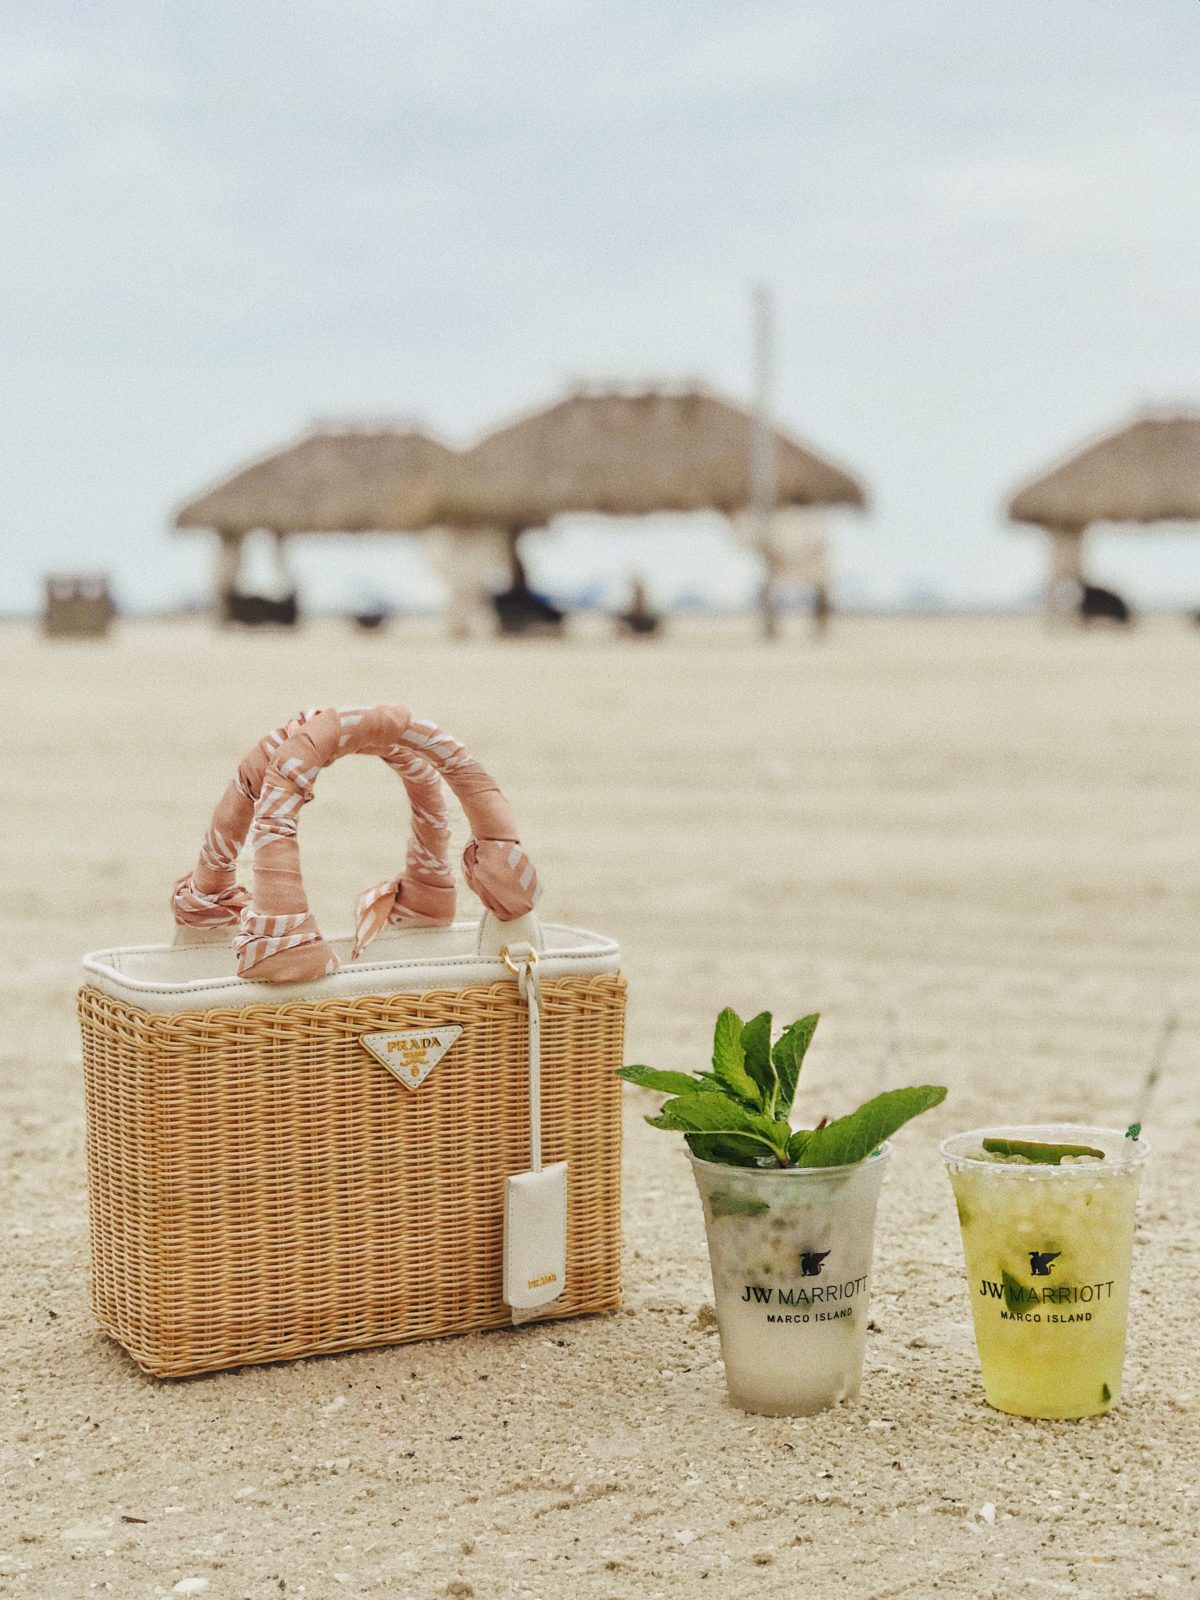 JW Marriott Marco Island by Luxury Travel Blogger Laura Lily: image of prada white & beige raffia garden tote resting in the sand on the beach next to a cocktail.